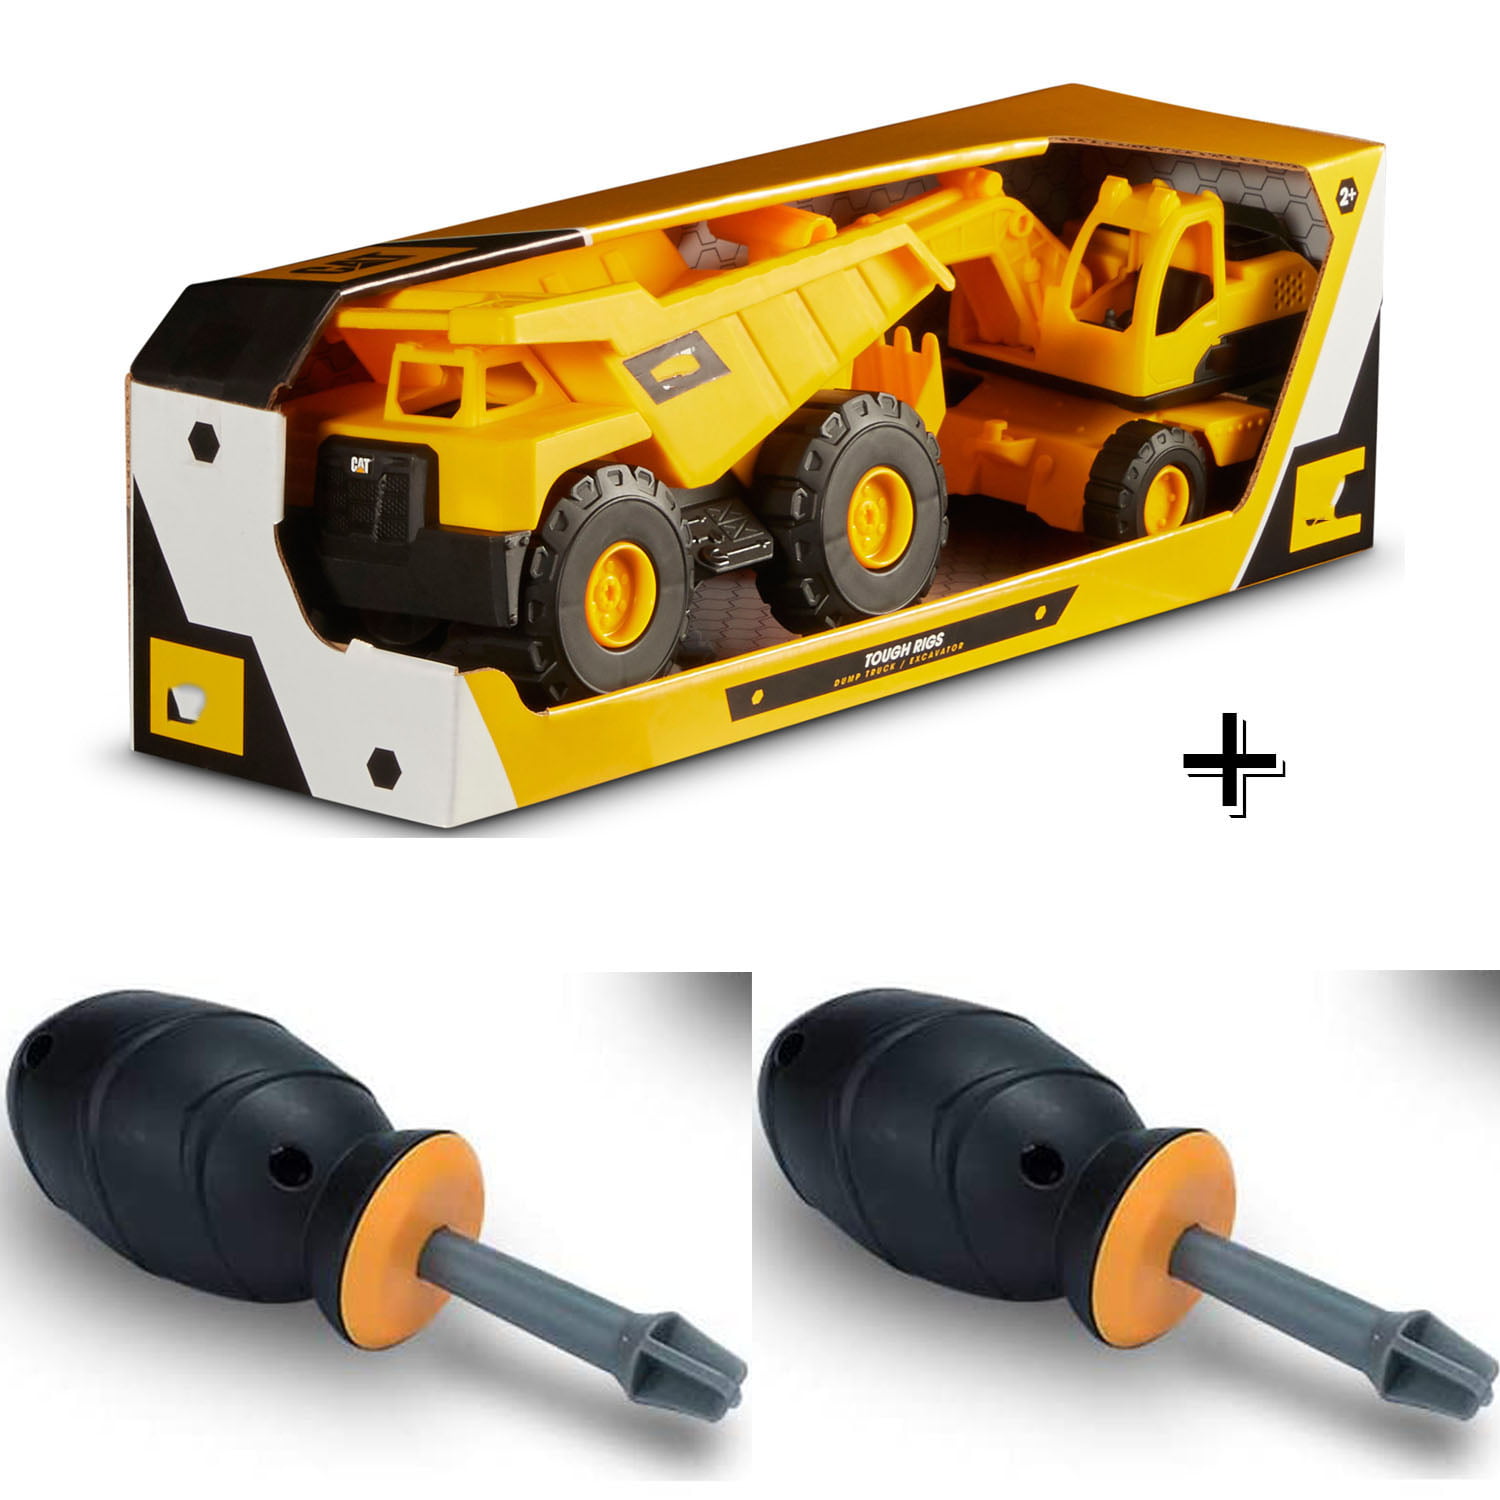 4 5 Ideal Educational Toy for Toddlers Toy Bulldozer with Constructions Set Boys & Girls Aged 3 WisToyz Take Apart Toys Toy Vehicles Building Toy Set with Screwdriver 6 